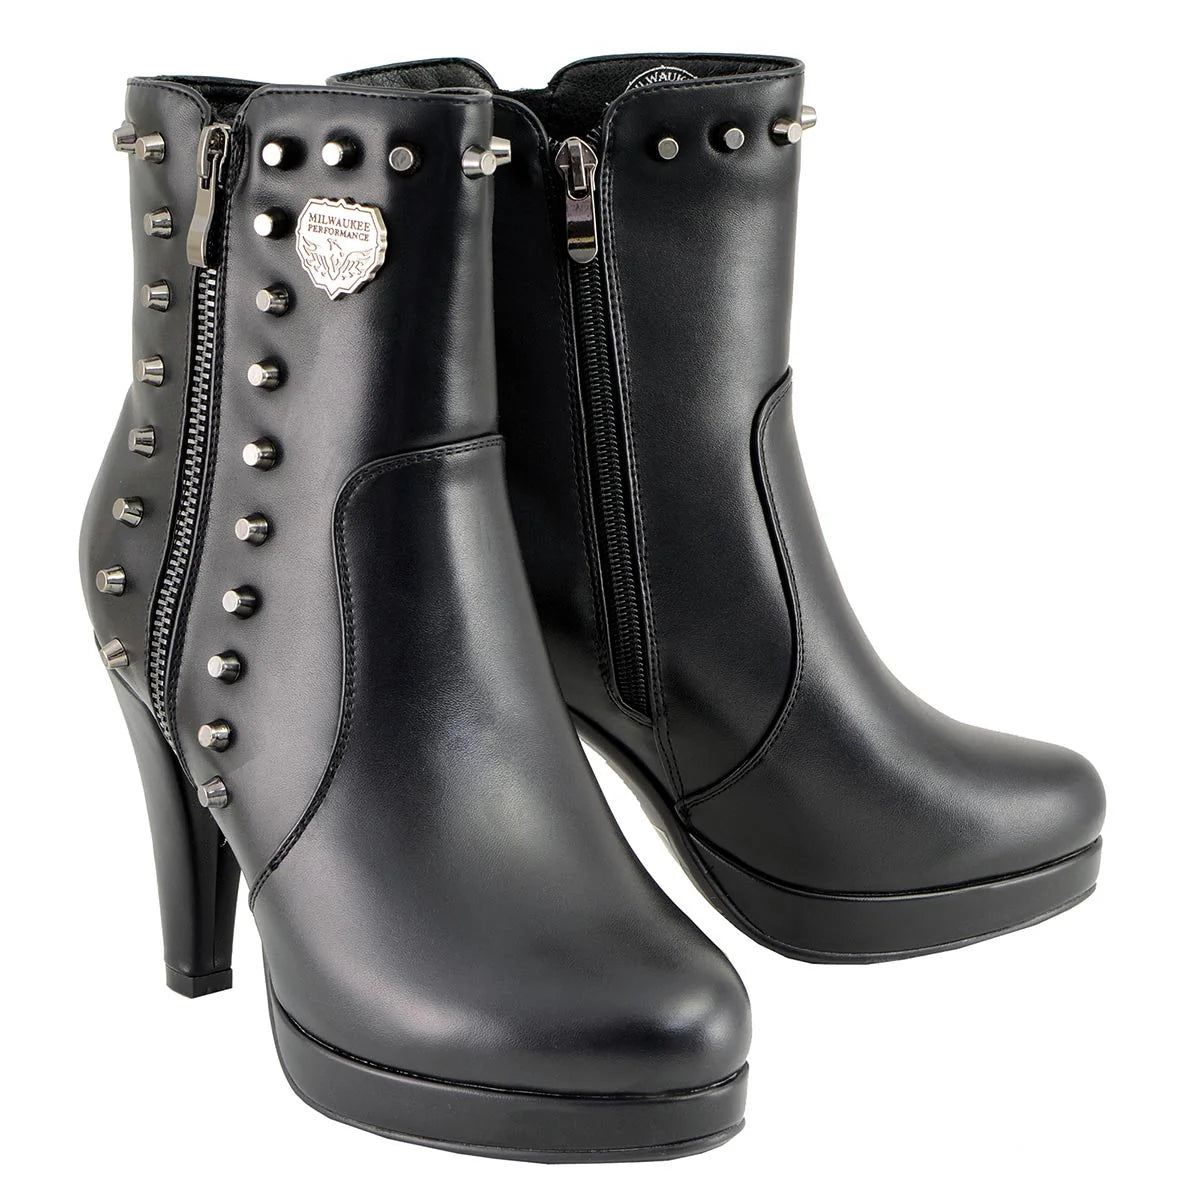 Women's Black Spiked Fashion Boots with Side Zippers